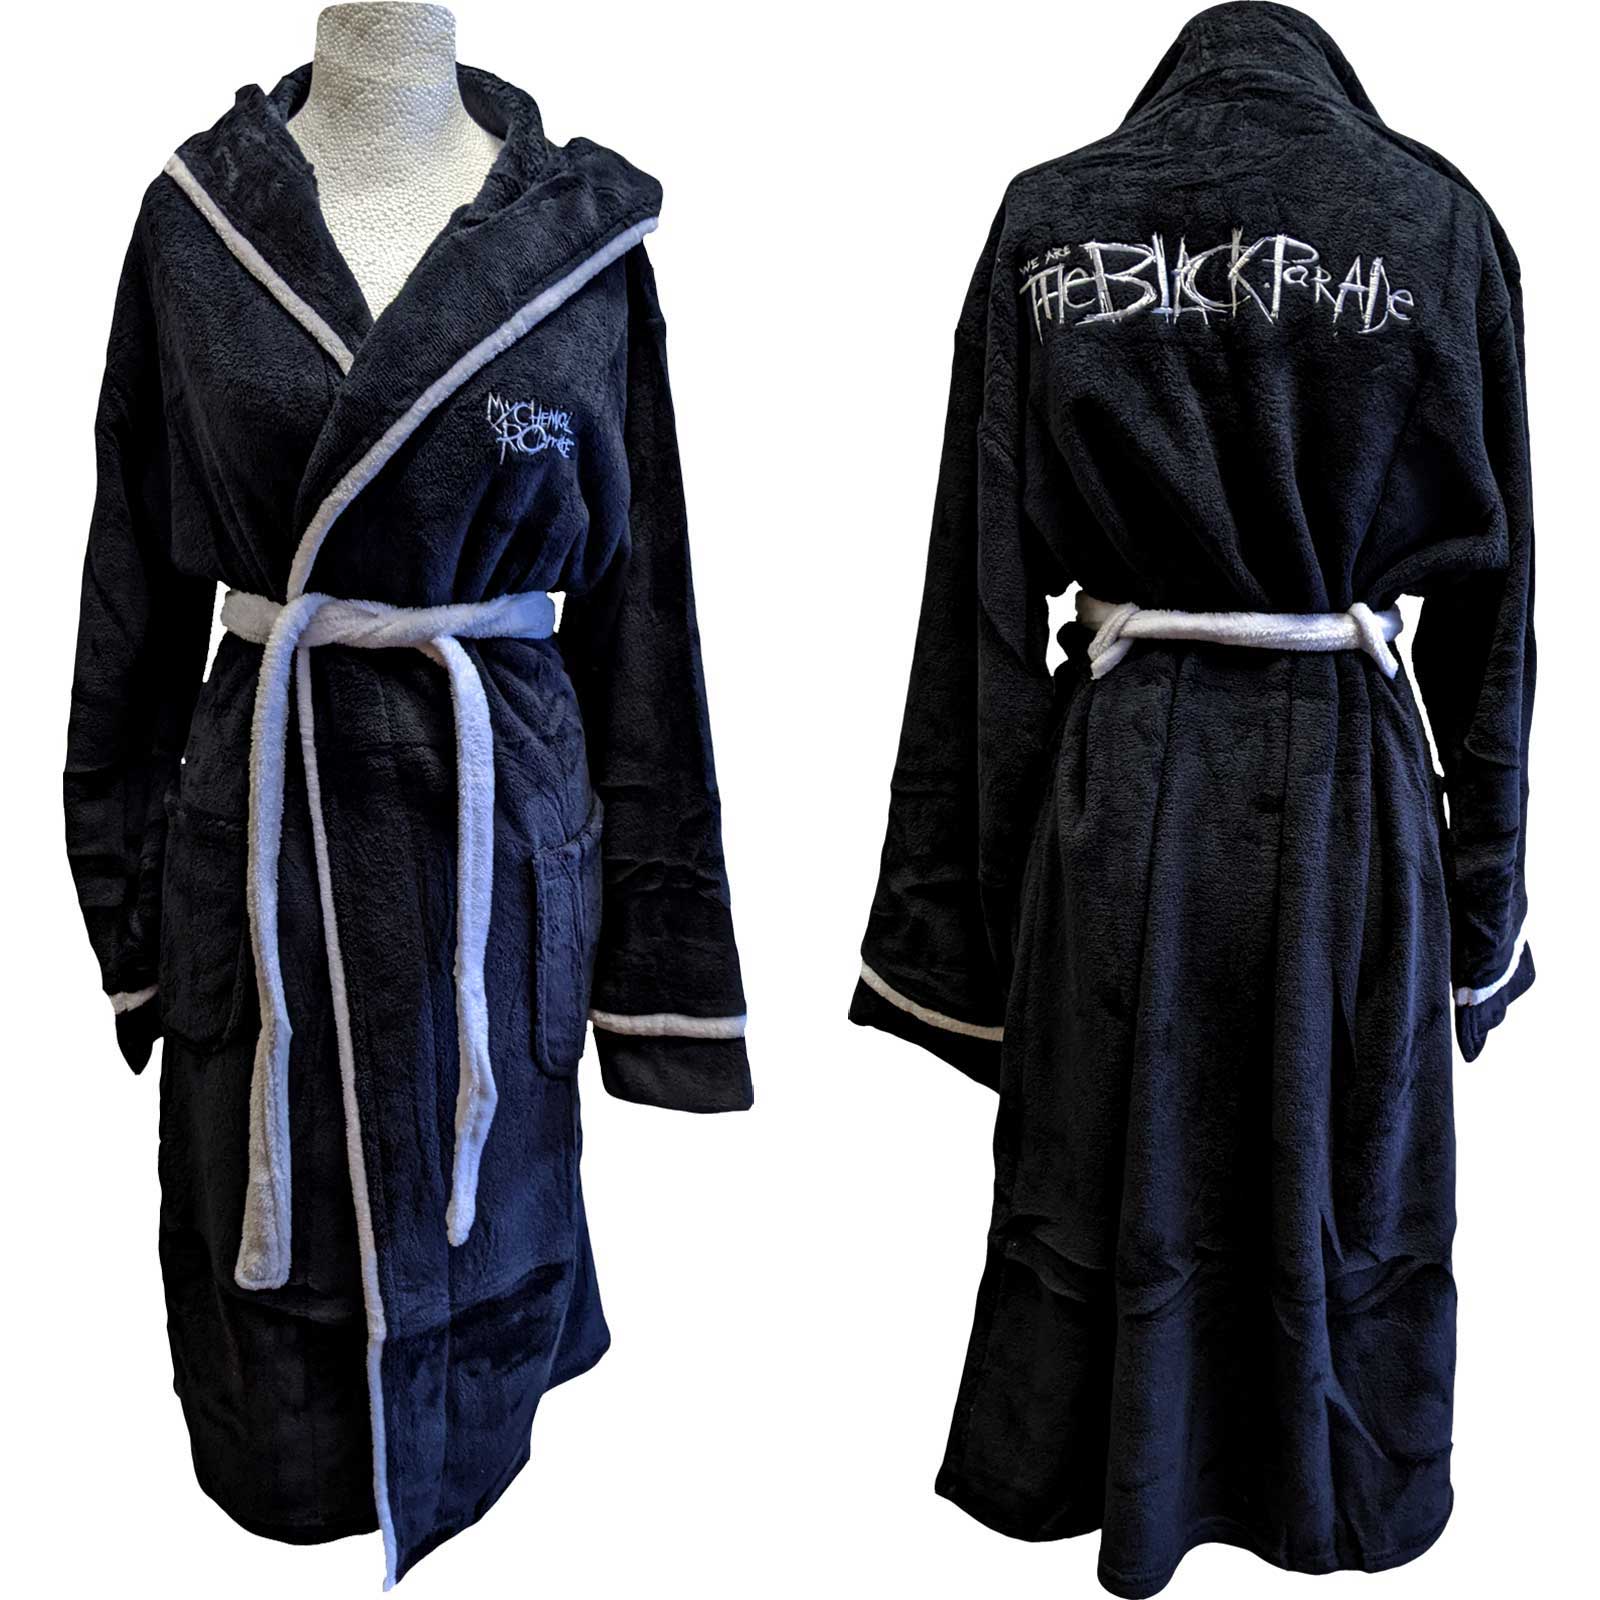 My Chemical Romance Bathrobe - The Black Parade Design - Official Licensed Music Design - Worldwide Shipping